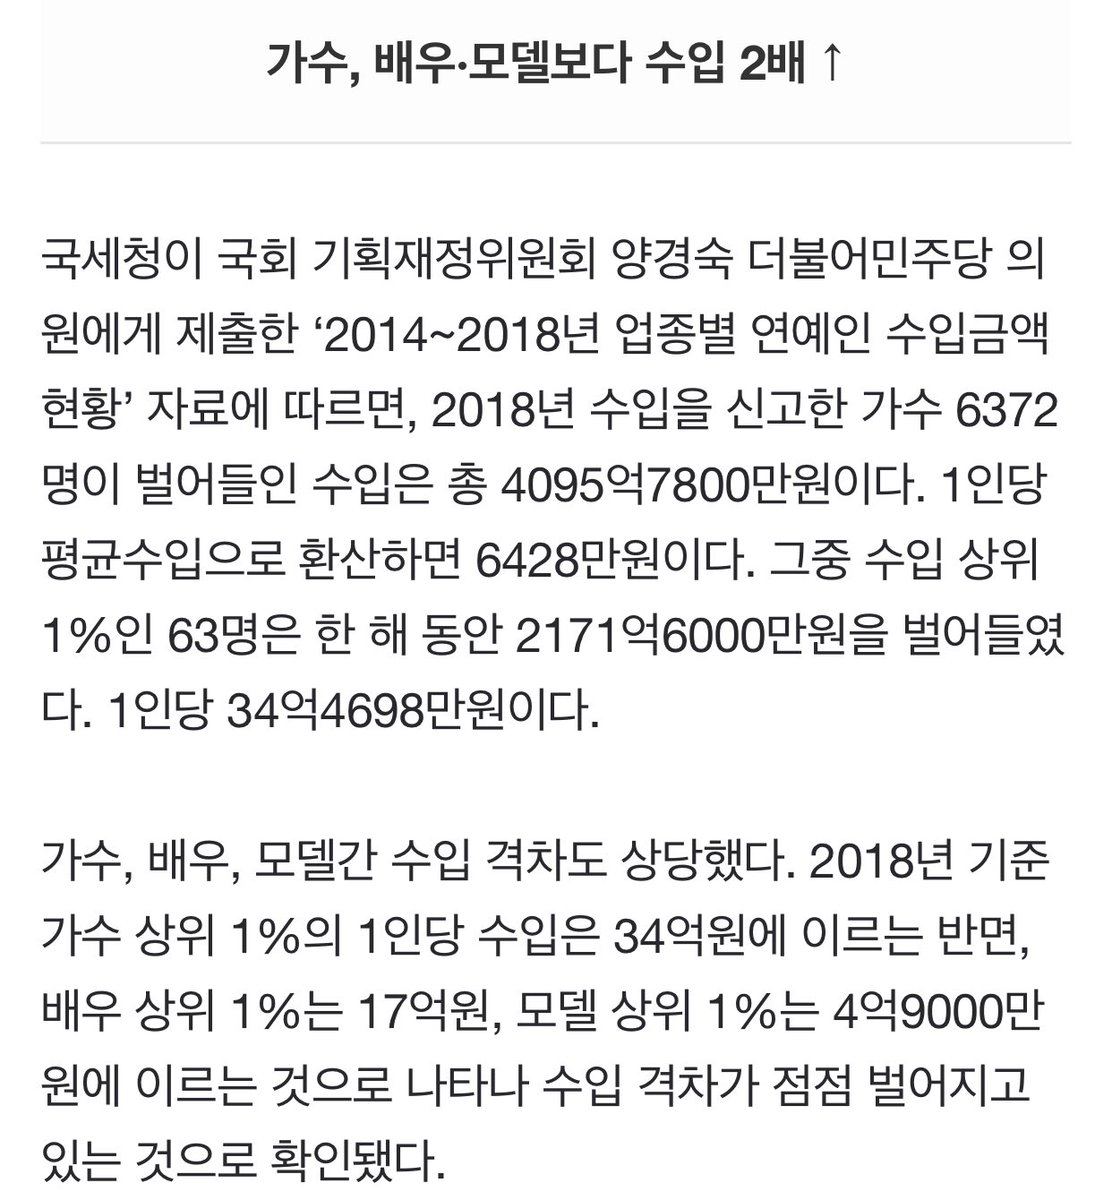 like temporary workers; there’s probably an even bigger gap when you compare income during active & inactive periods.”• Singers’ income is more than 2x than actors•modelsAcc to 2014-2018 data submitted by the National Tax Service to Democratic Party member Yang Kyungsook, +